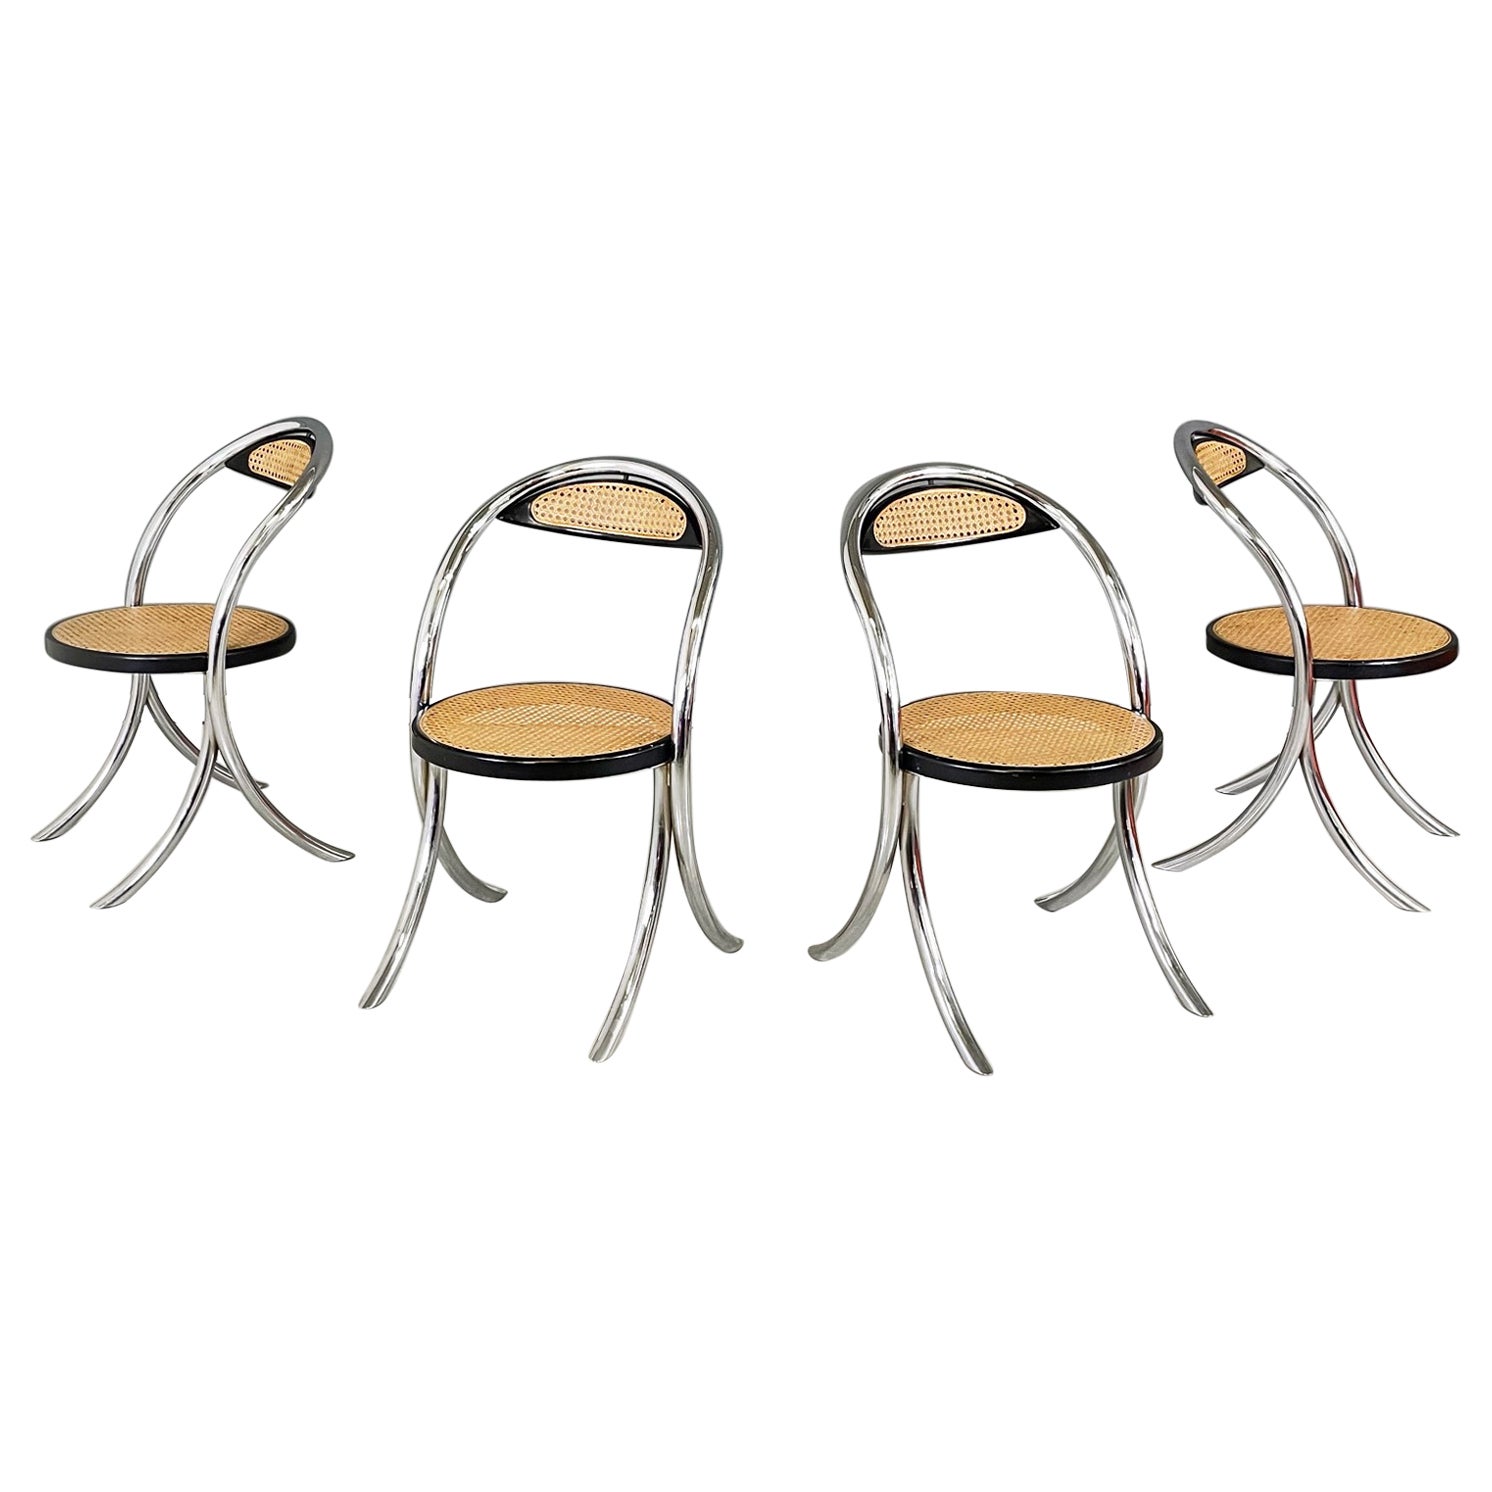 Italian mid-century modern Chairs in straw, black wood and tubular steel, 1970s For Sale